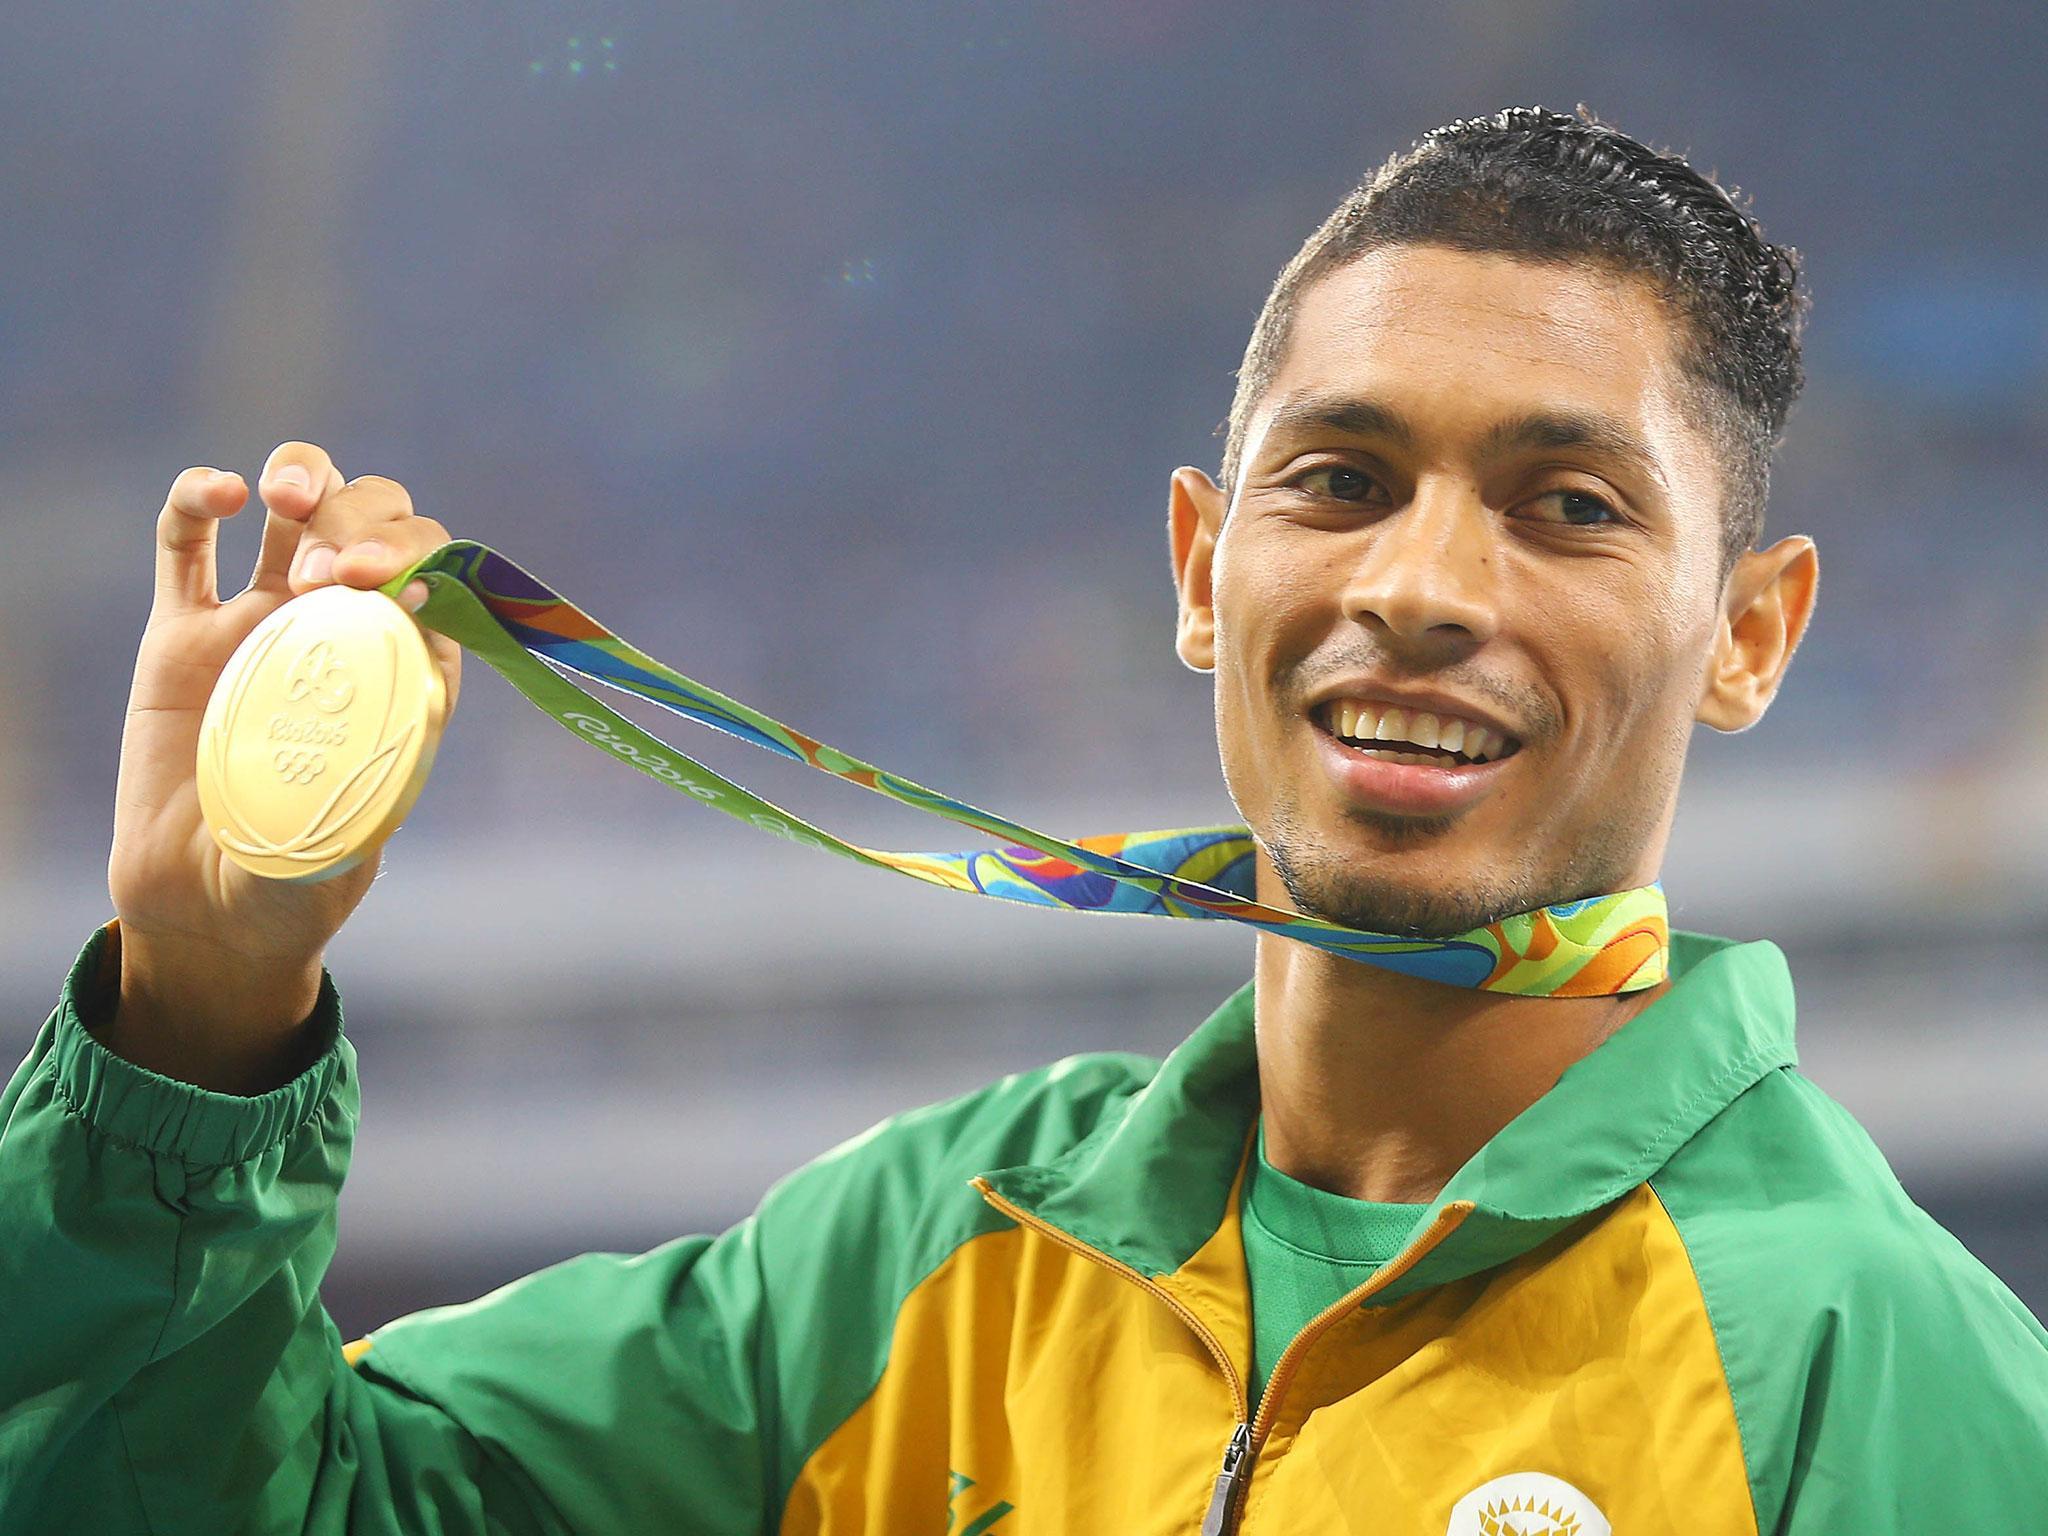 &#13;
Van Niekerk of South Africa poses with his gold medal after breaking the 400m world record at Rio &#13;